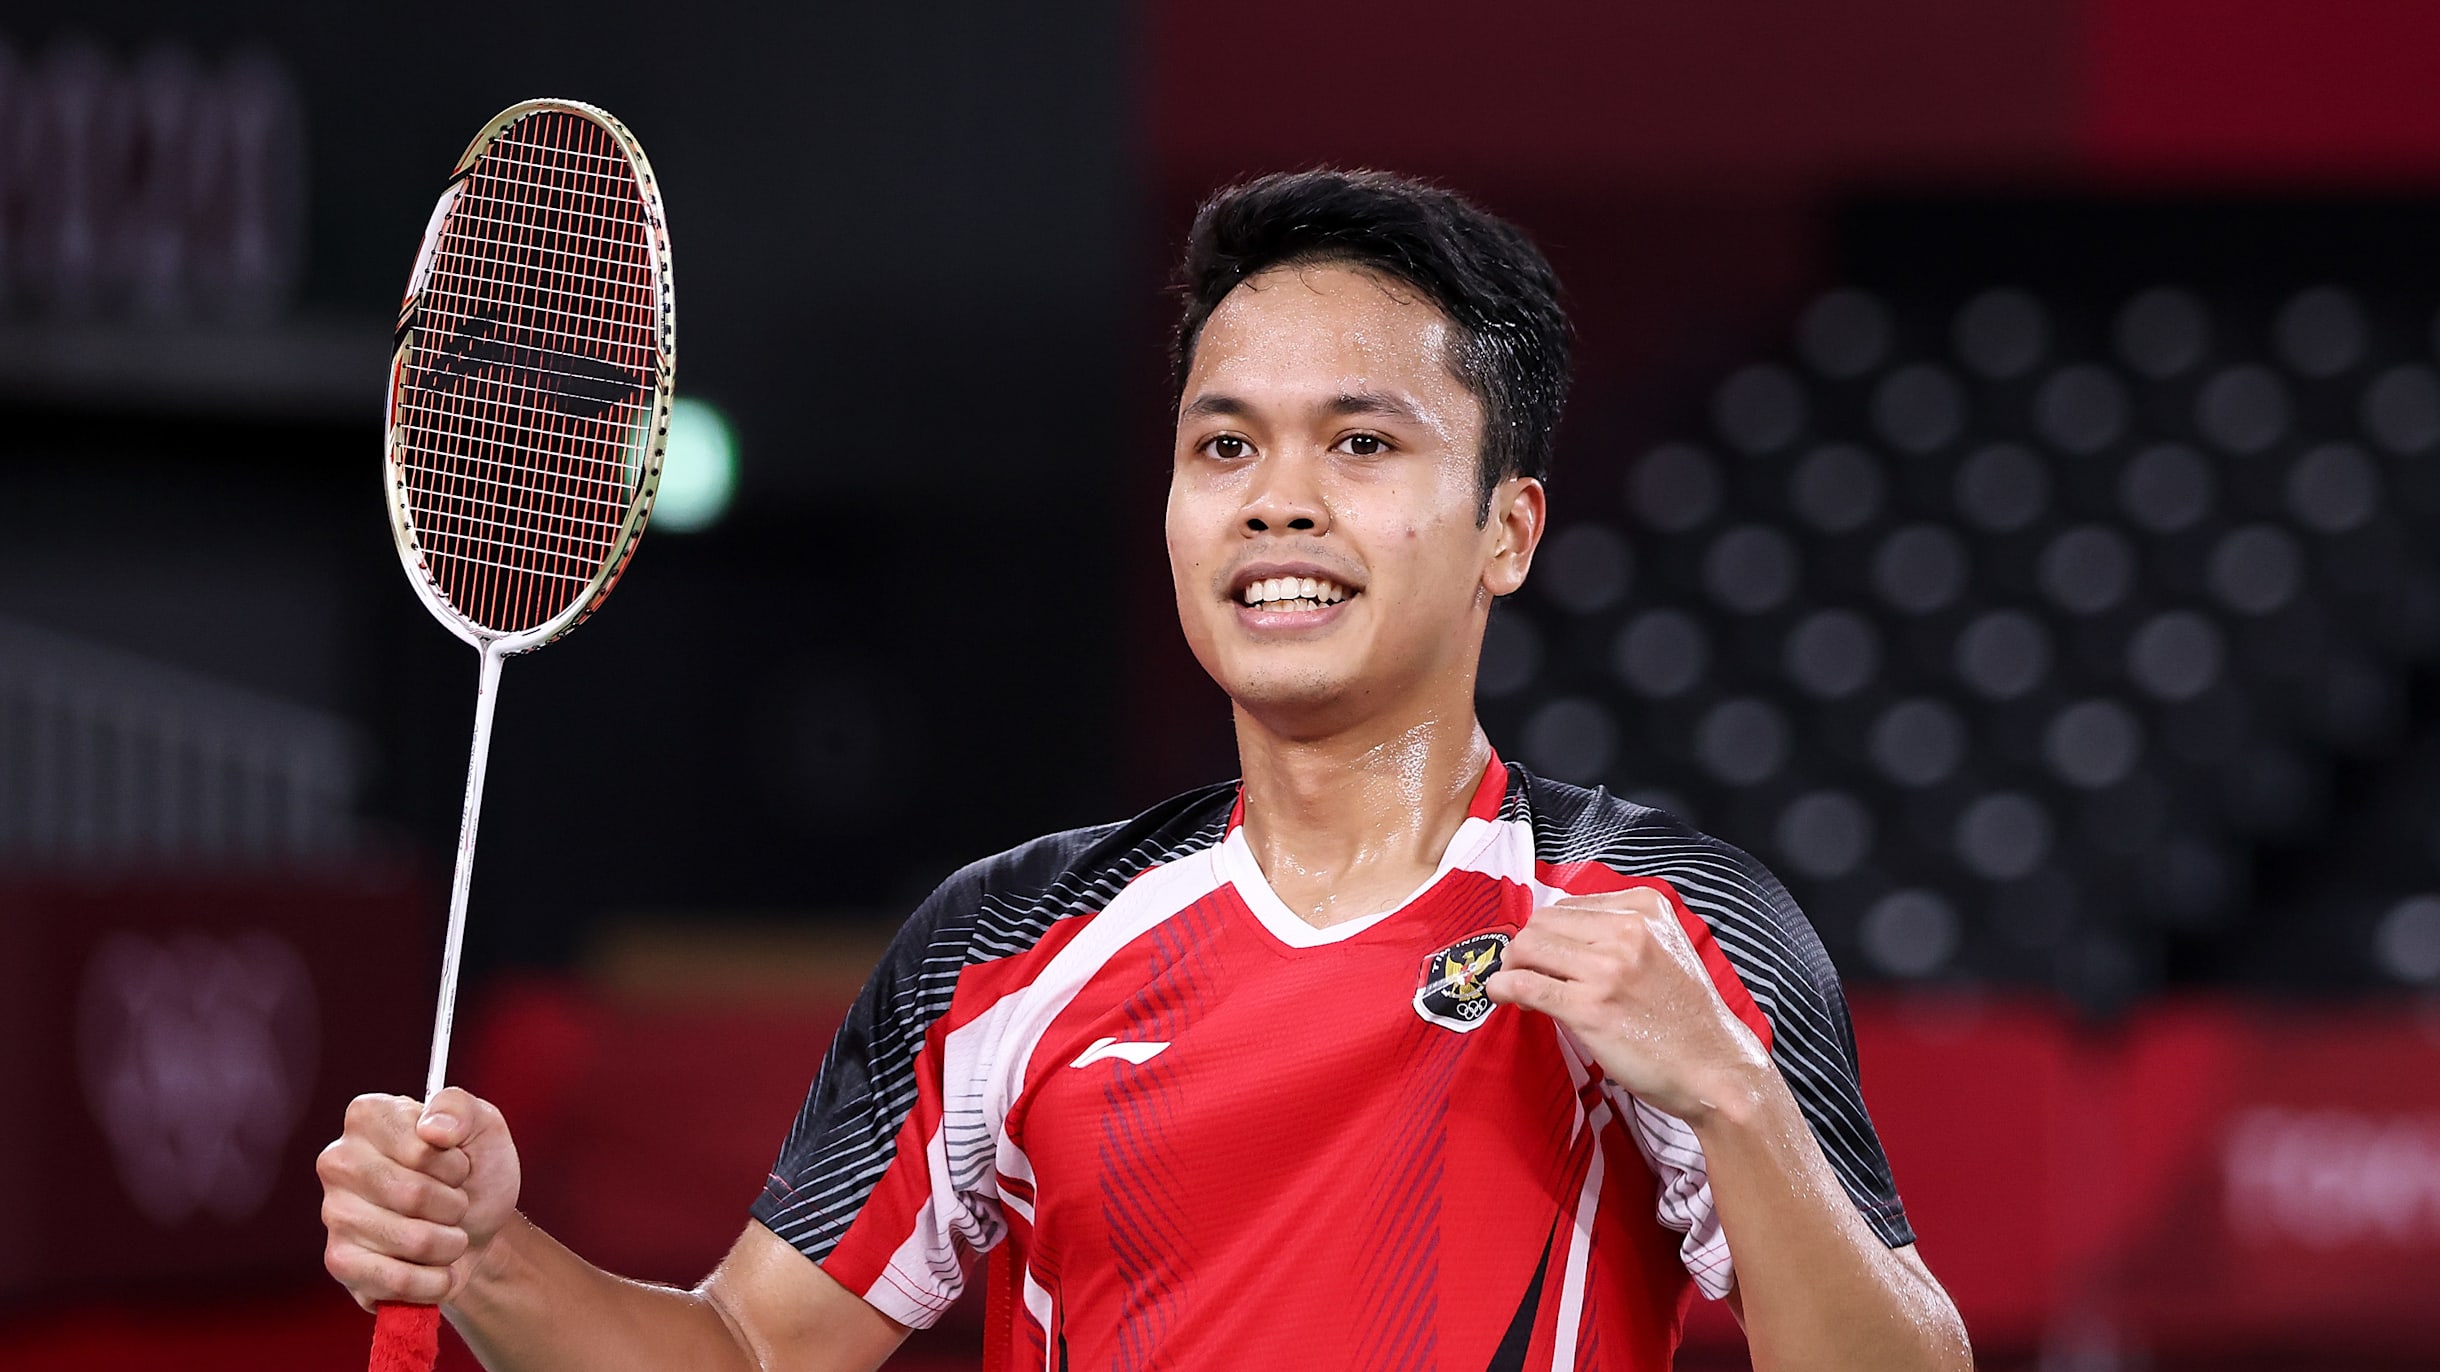 Badminton - 2022 Singapore Open Anthony Ginting wins mens title with victory over Naraoka Kodai